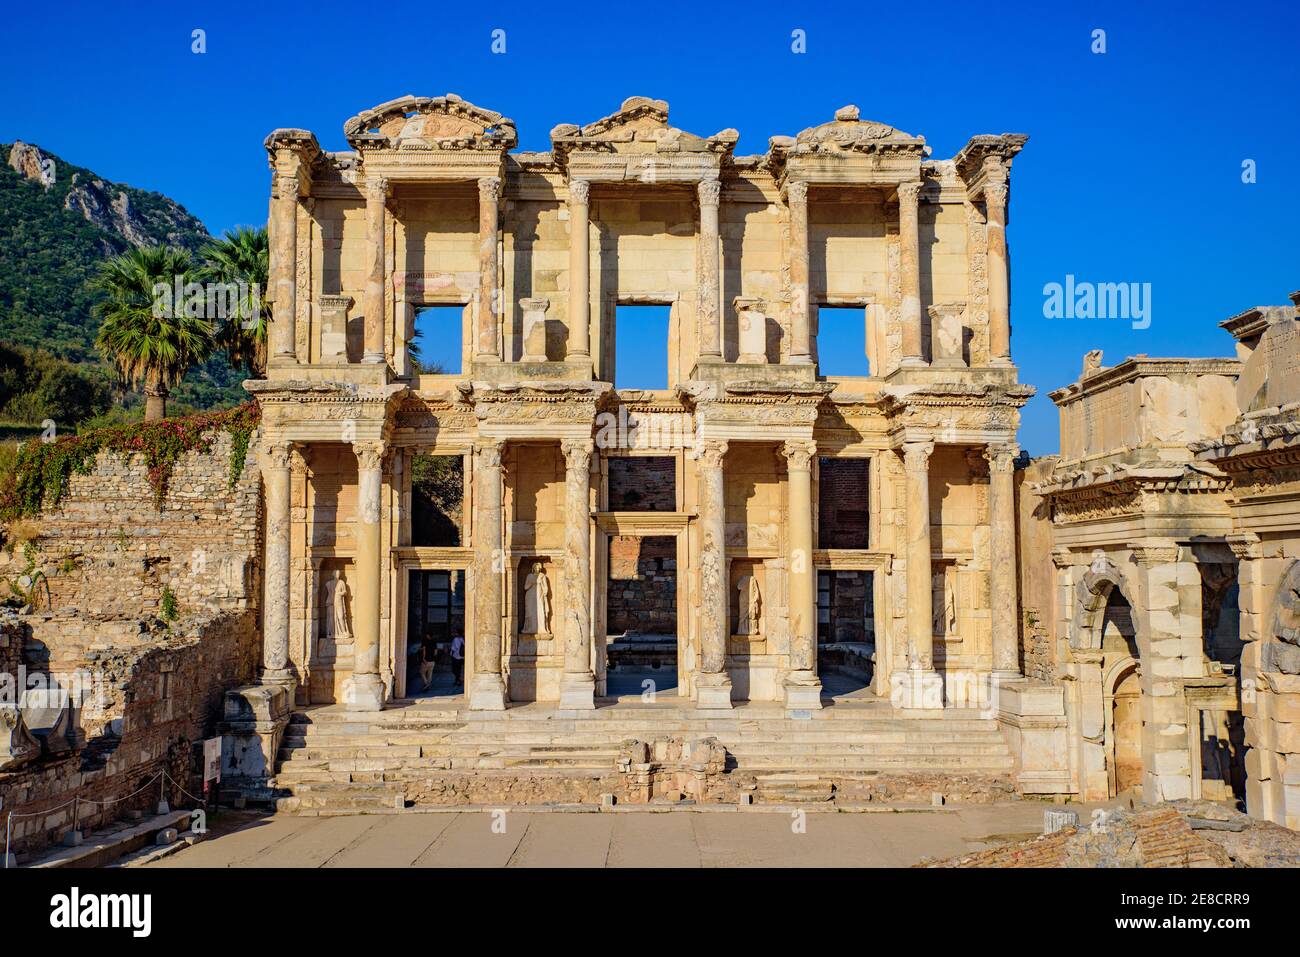 Library of Celsus, an ancient Roman building in Ephesus Archaeological Site, Turkey Stock Photo